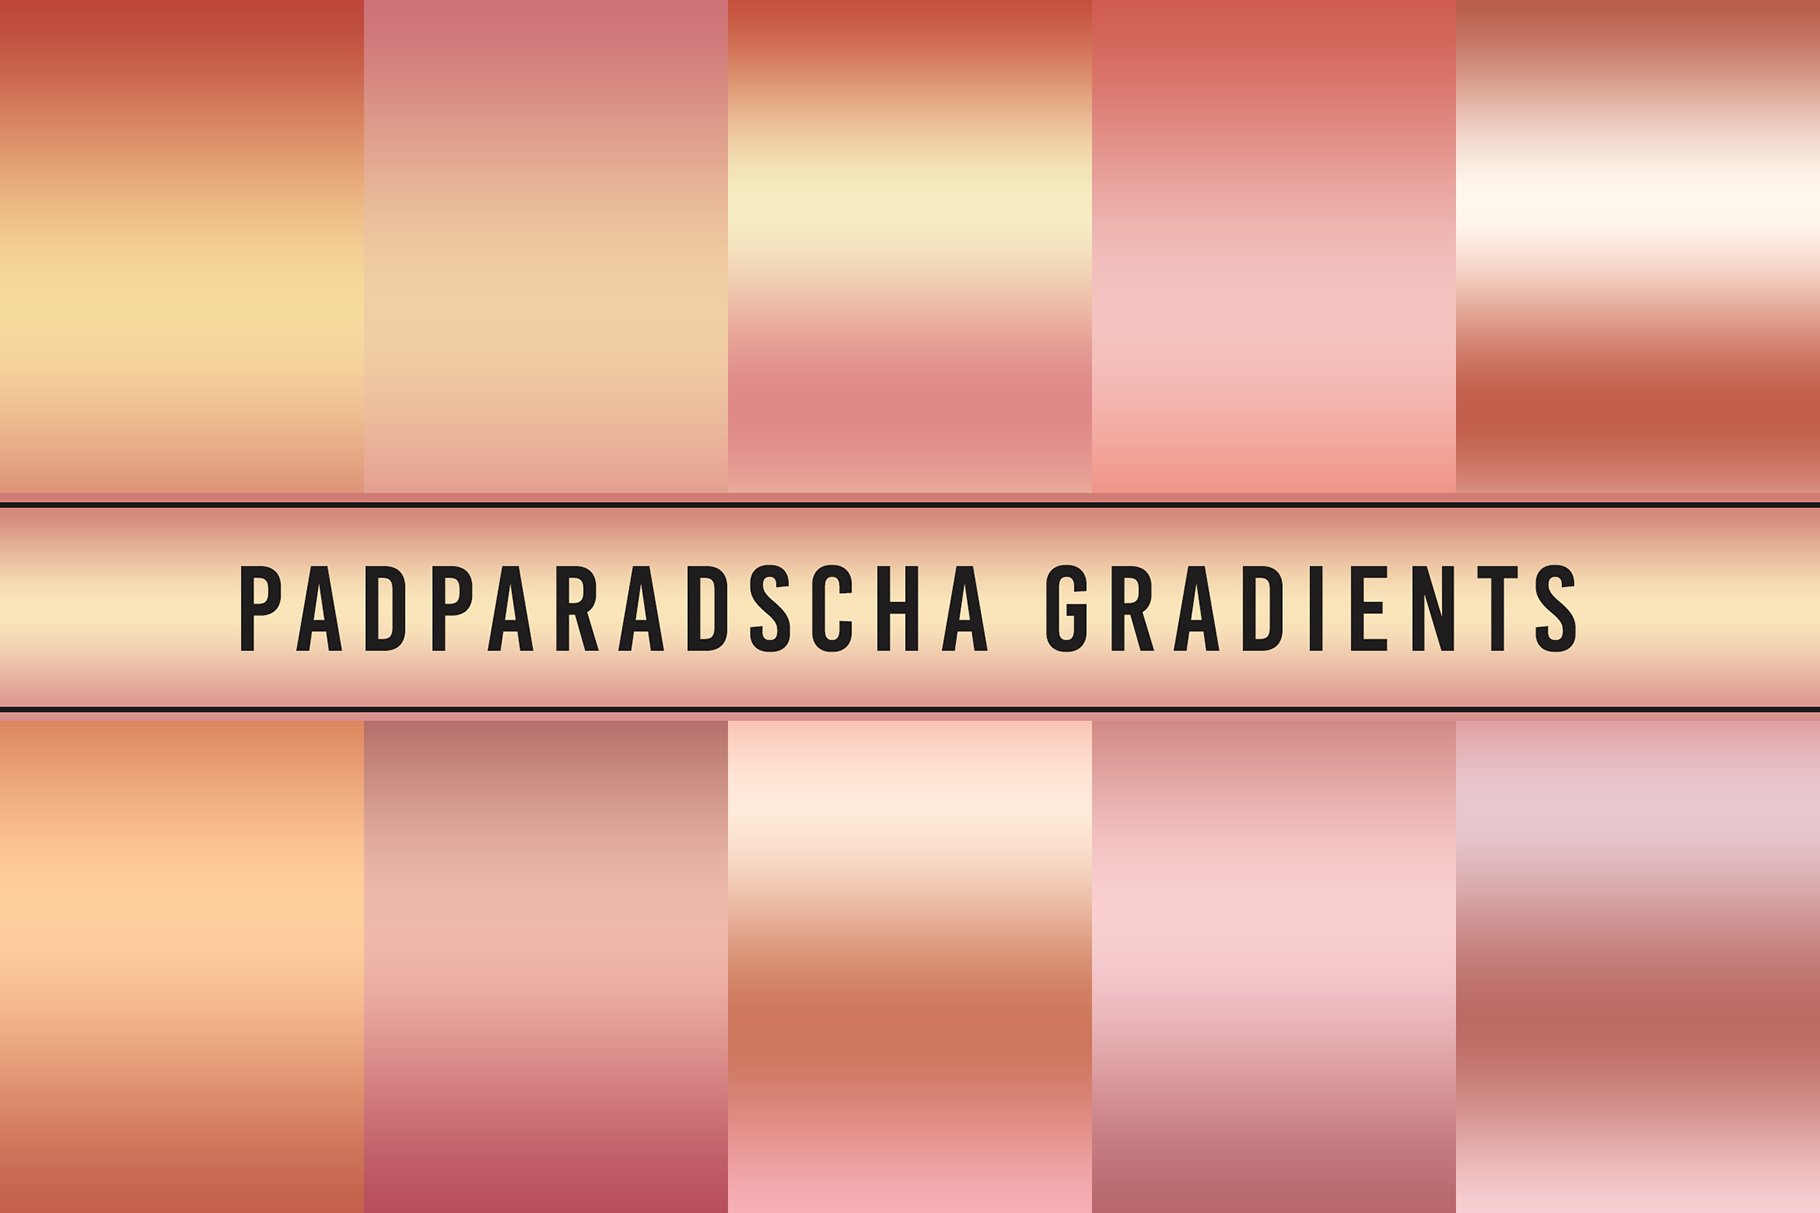 Padparadscha Gradientscover image.